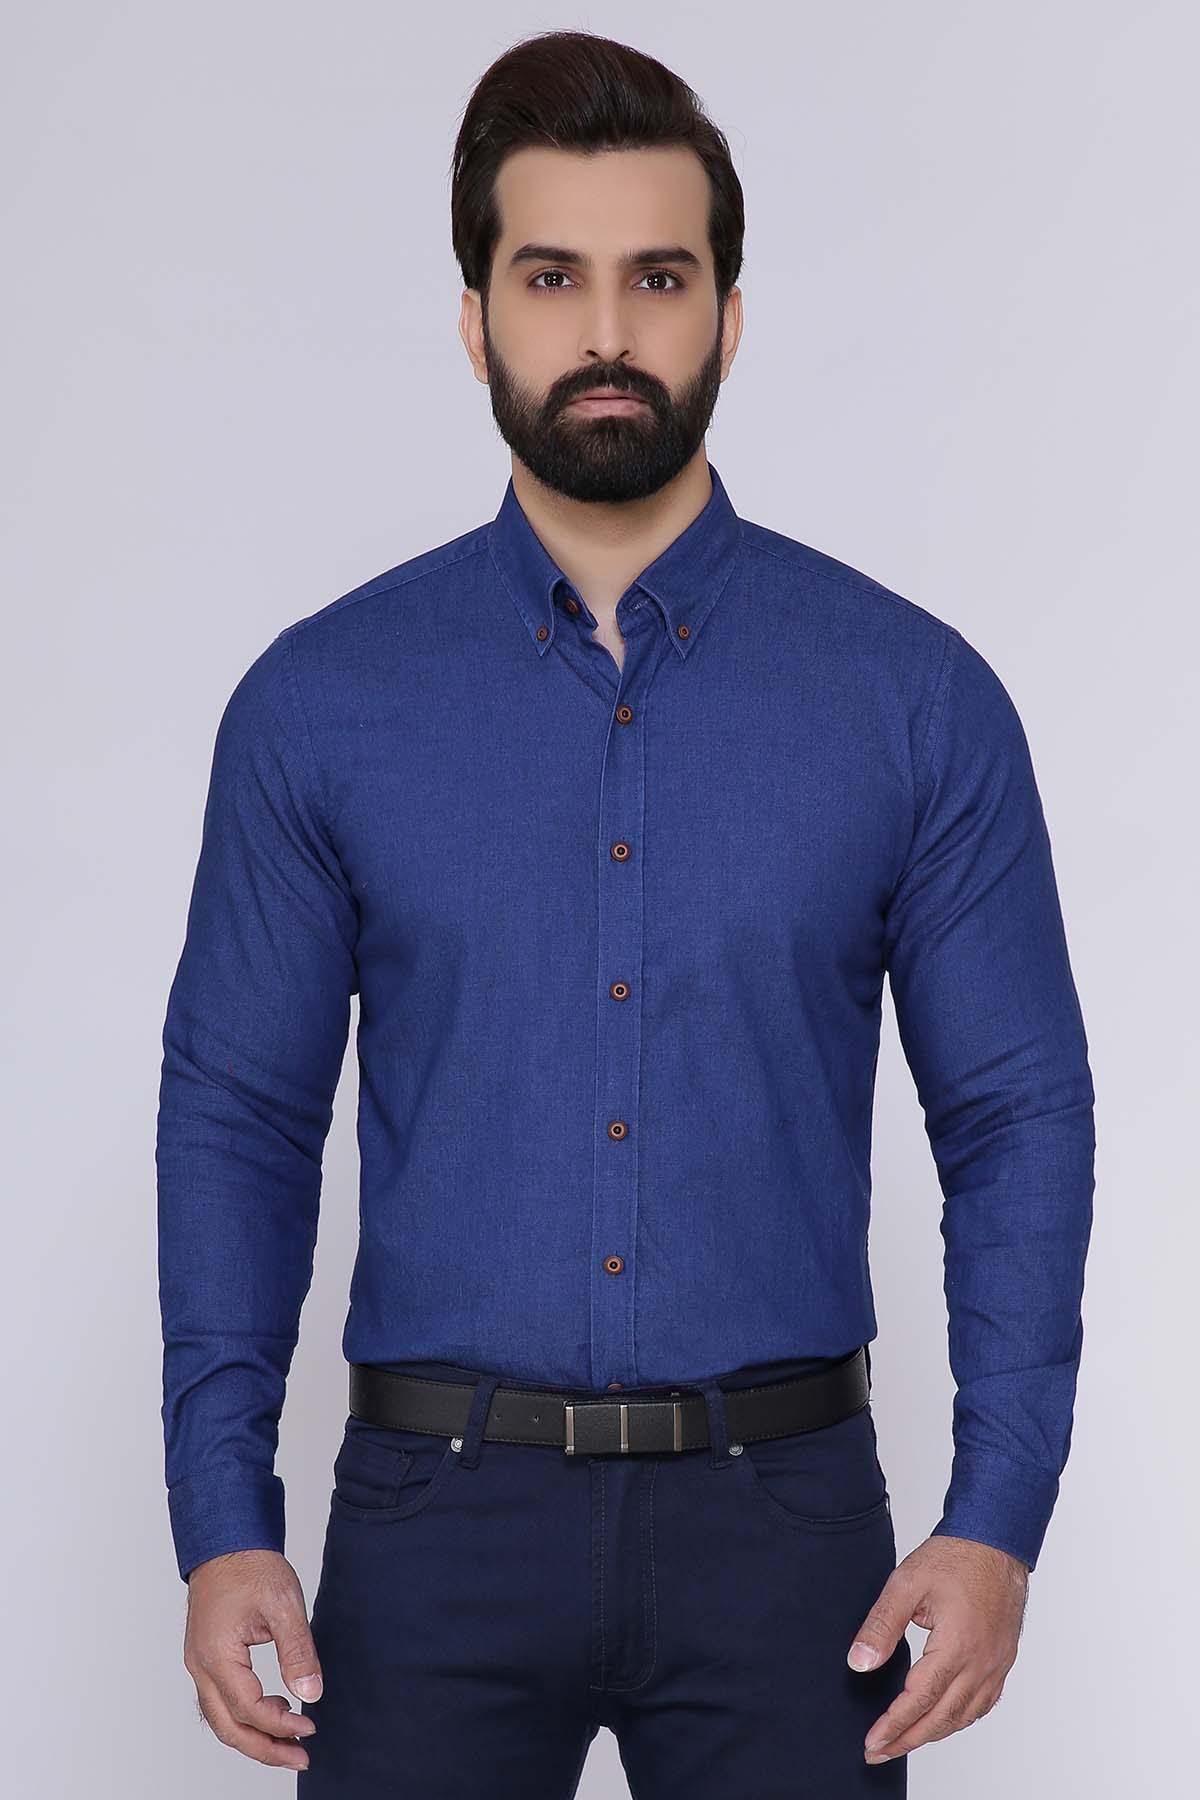 SMART SHIRT FULL SLEEVE BUTTON DOWN DARK BLUE at Charcoal Clothing